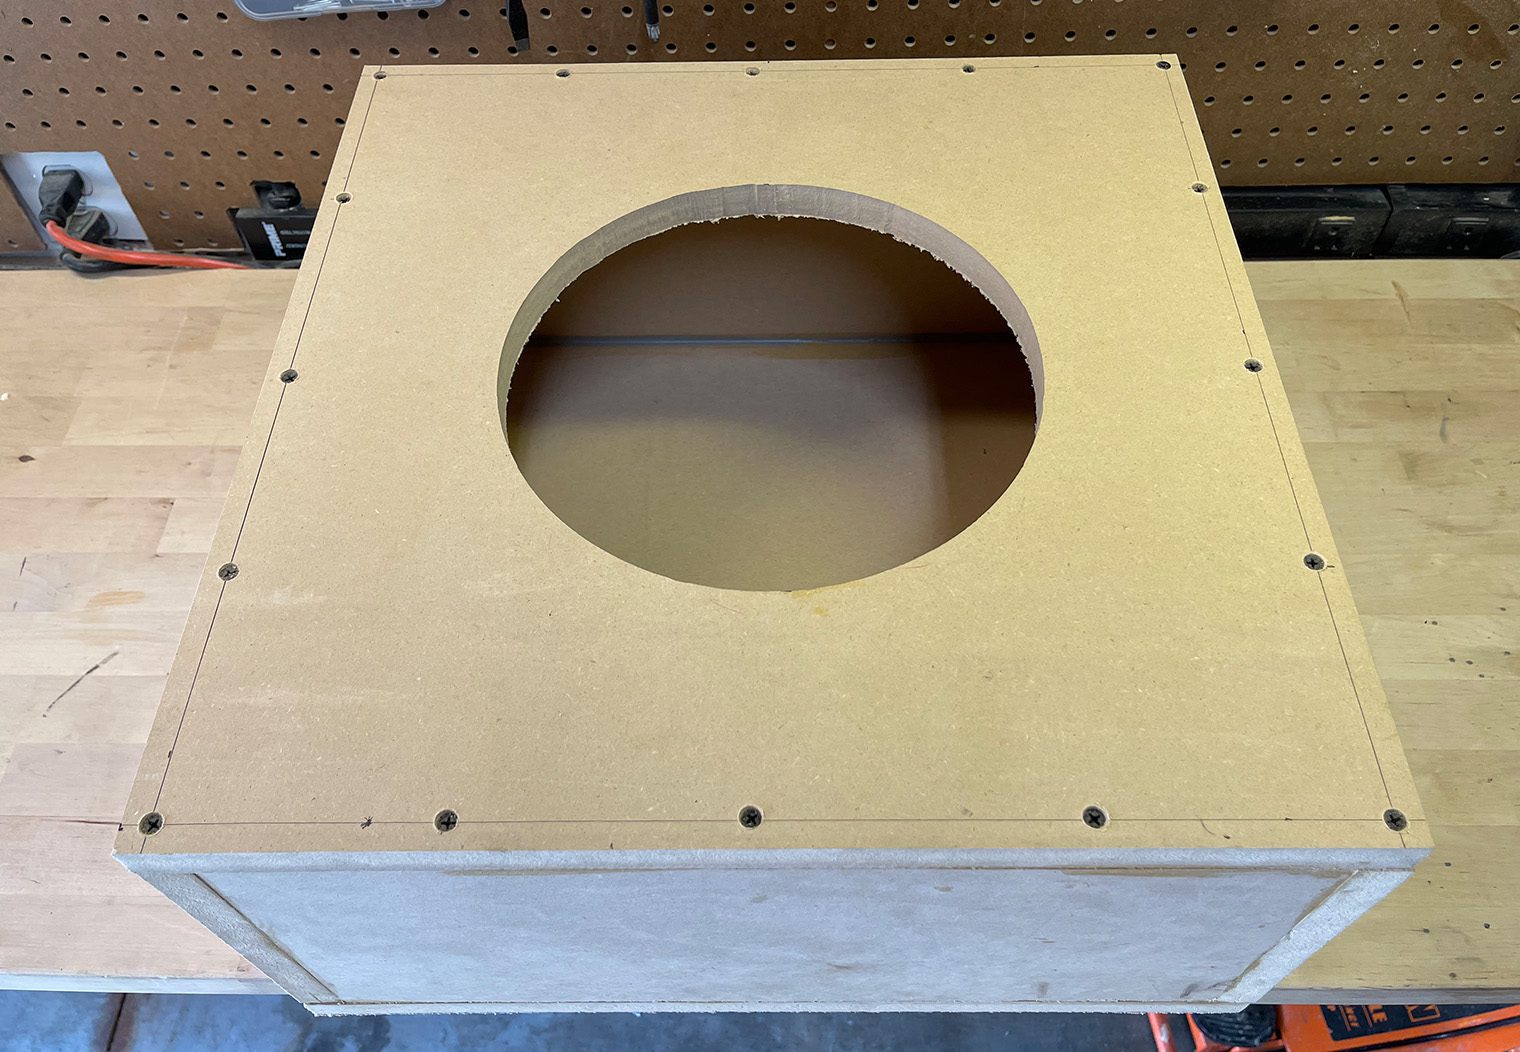 Picture of the assembled subwoofer enclosure built for a 2018 VW GTI MK7.5